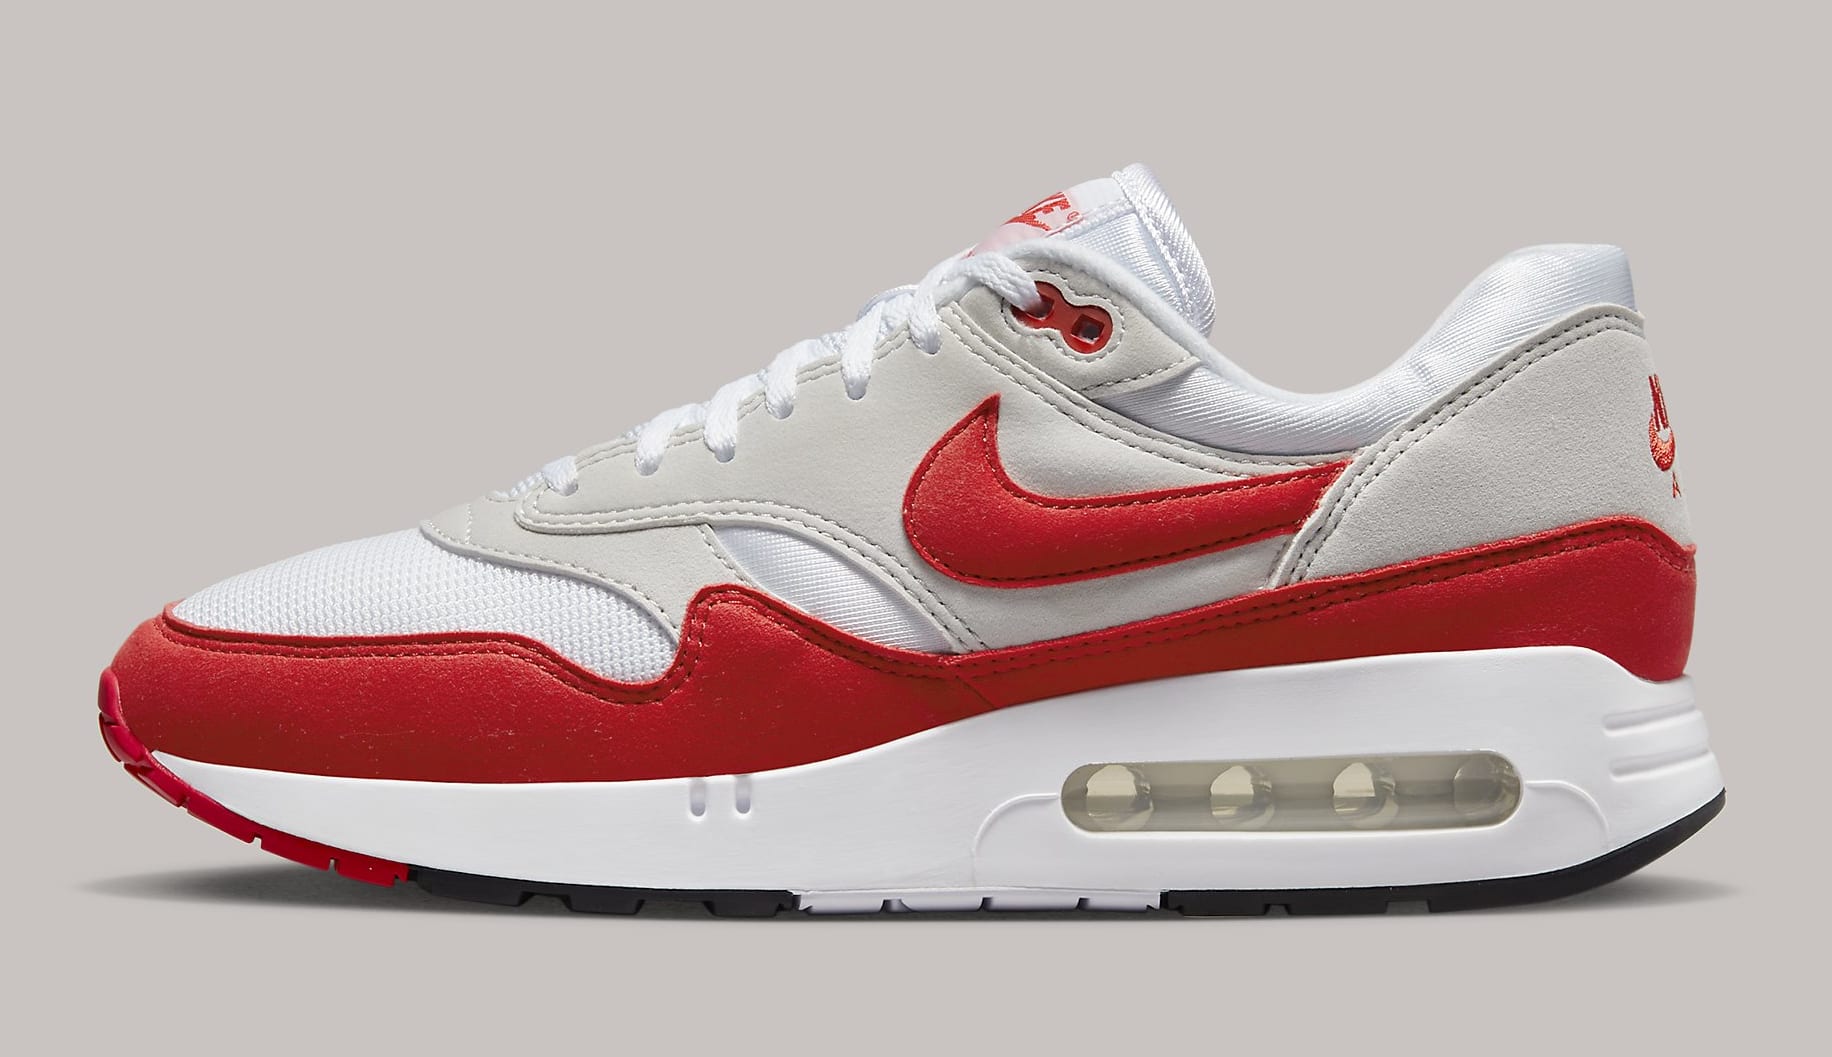 EARLY LOOK! Nike Air Max 1 Big Bubble '86 OG On Feet Review 